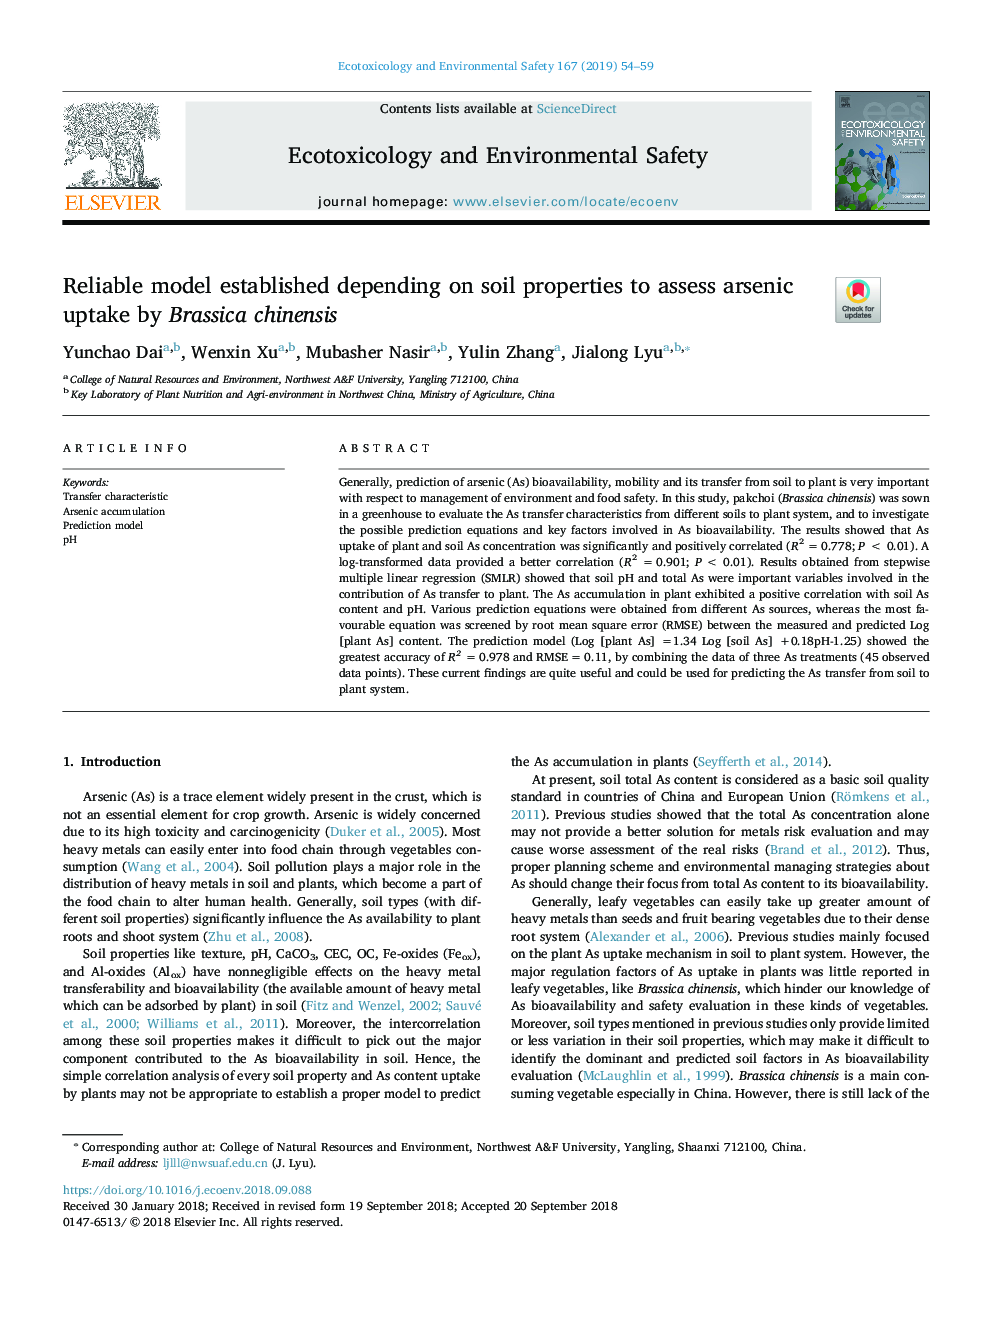 Reliable model established depending on soil properties to assess arsenic uptake by Brassica chinensis